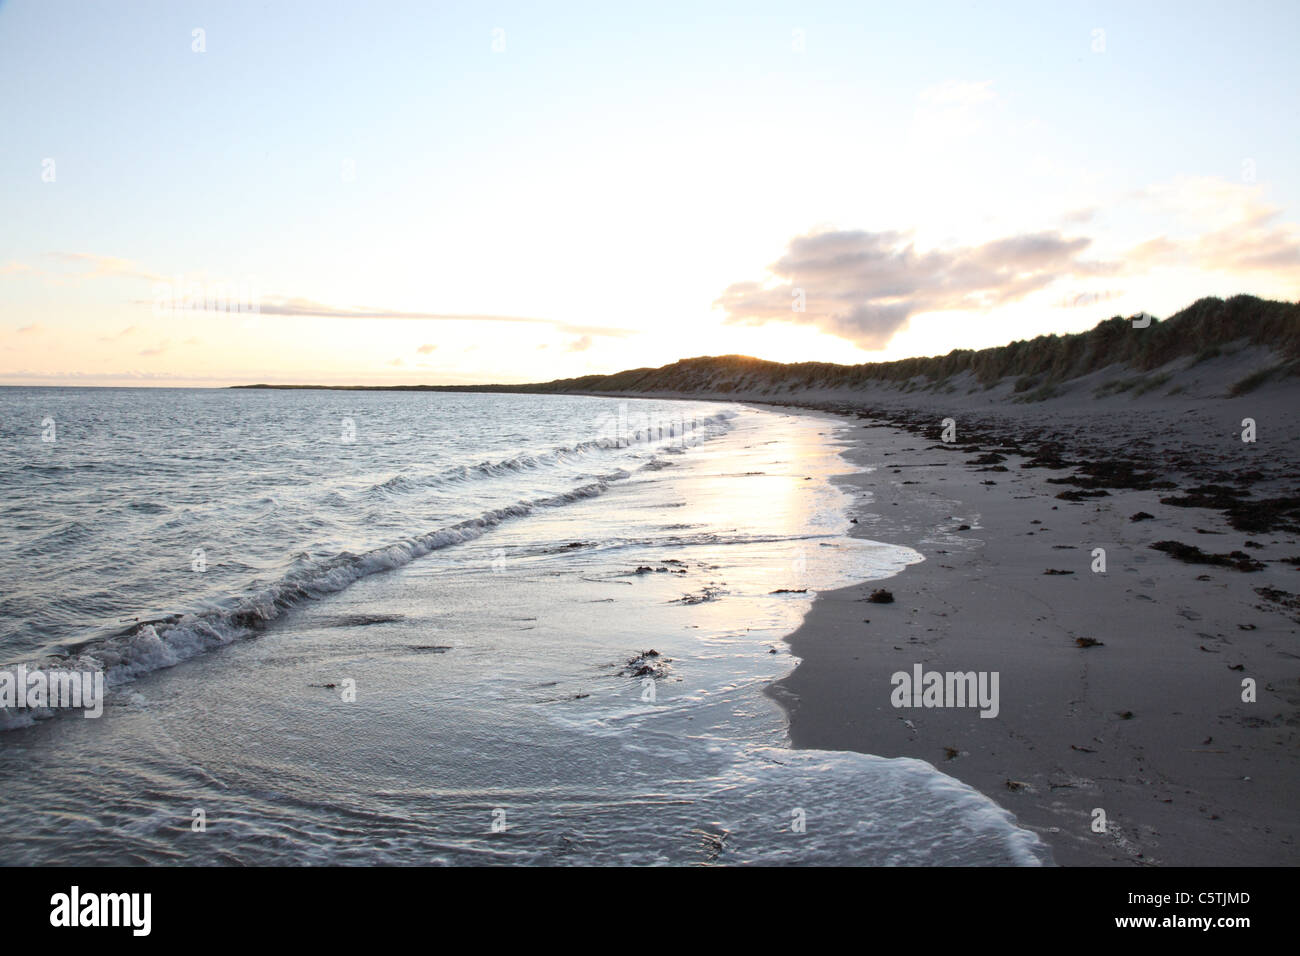 The beach at Eilean Siar, Benbecula, Outer Hebrides looking towards the mountains of South Uist Stock Photo